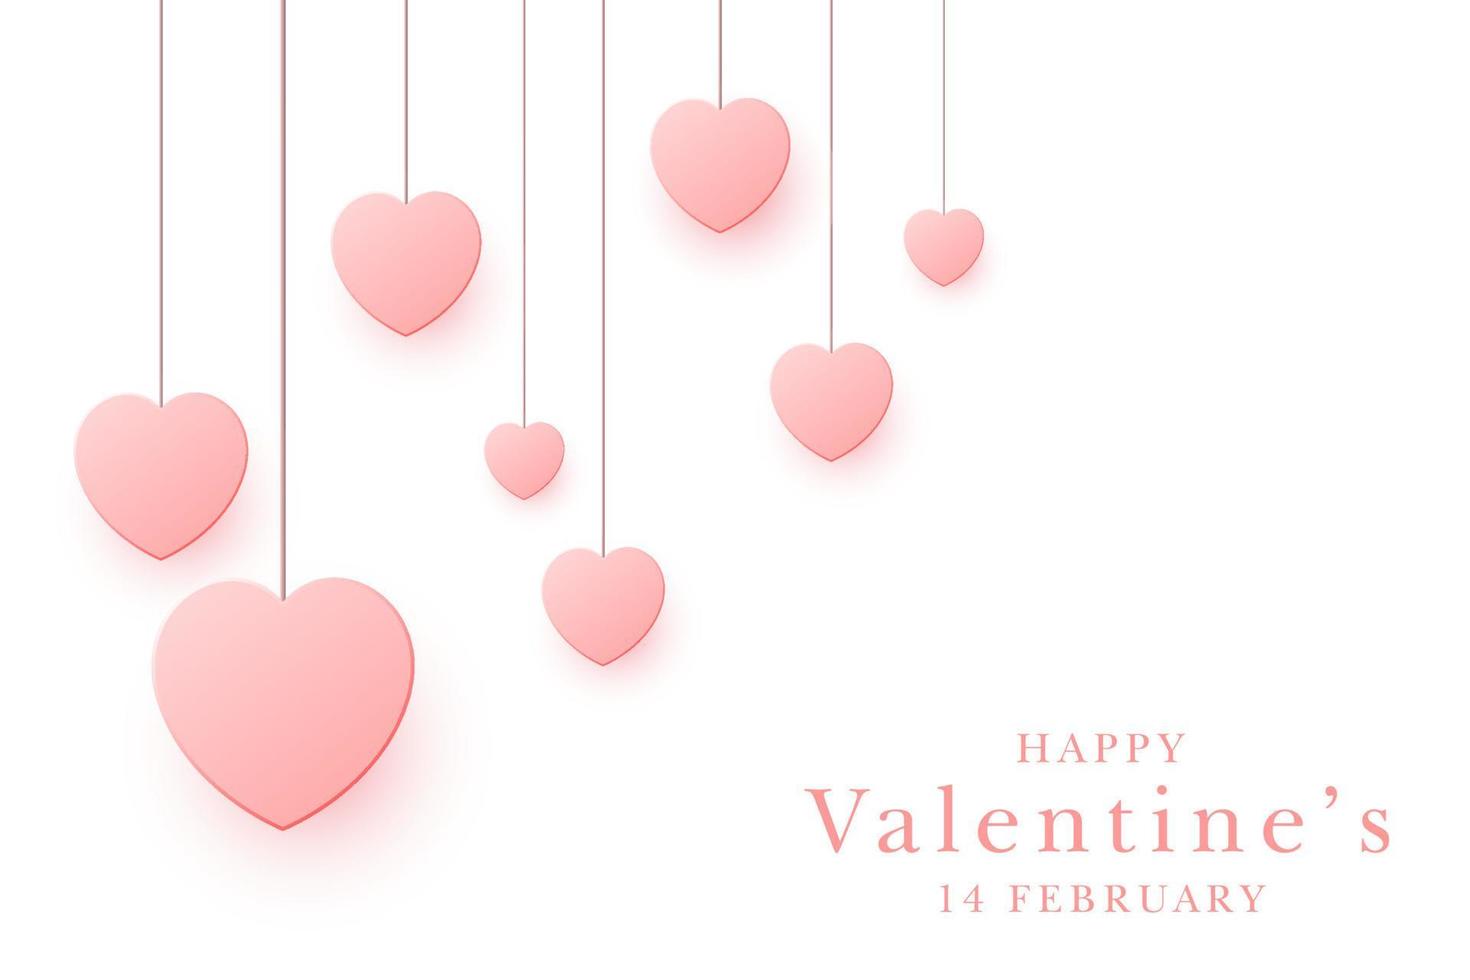 Valentines day banner with hanging hearts. Vector illustration.